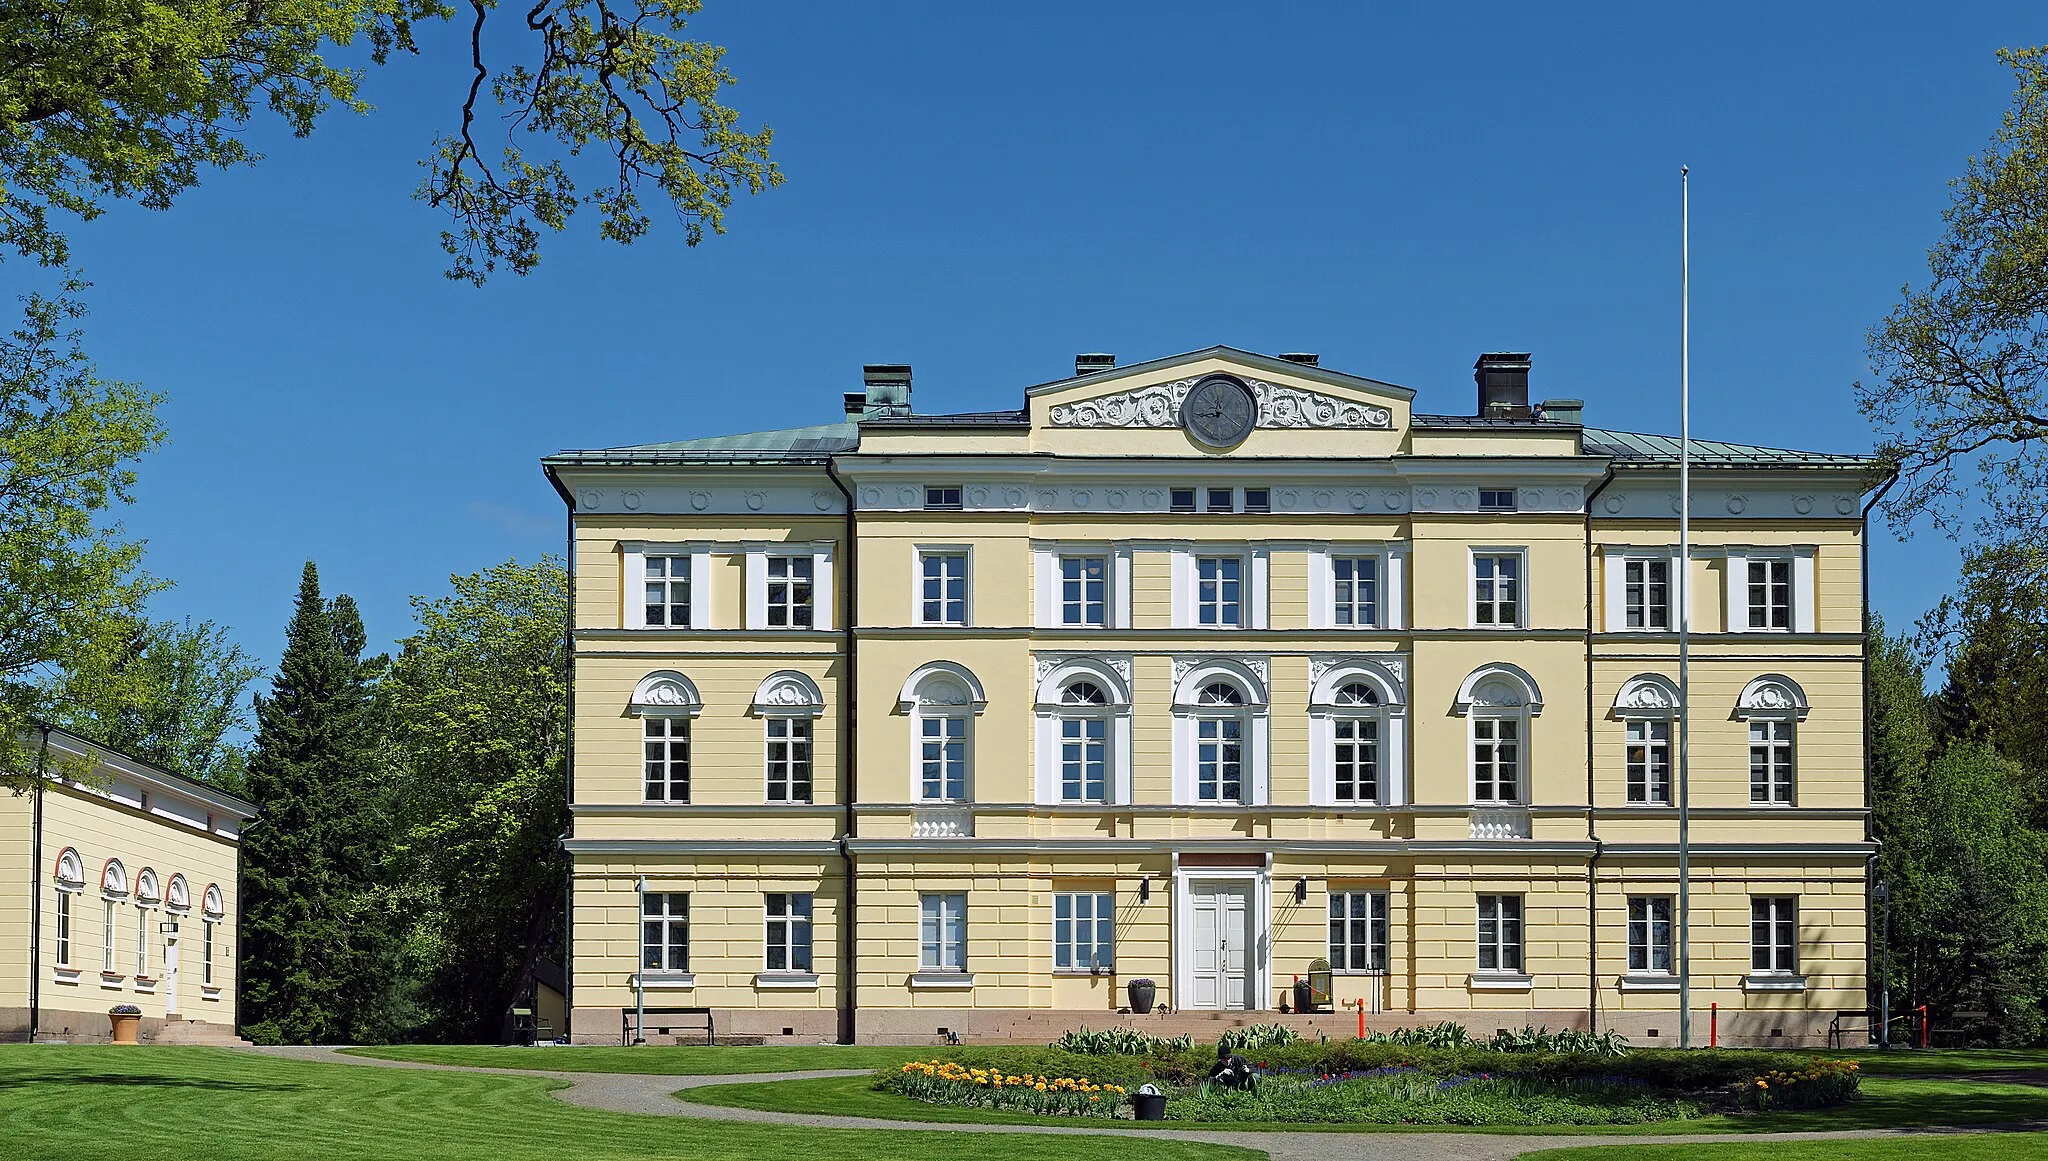 Photo showing: Vuojoki Manor at Eurajoki, Finland, photographed from the South. The manor, designed by Carl Ludvig Engel, is a cultural center and the headquarters of the Finnish nuclear waste repository corporation Posiva.